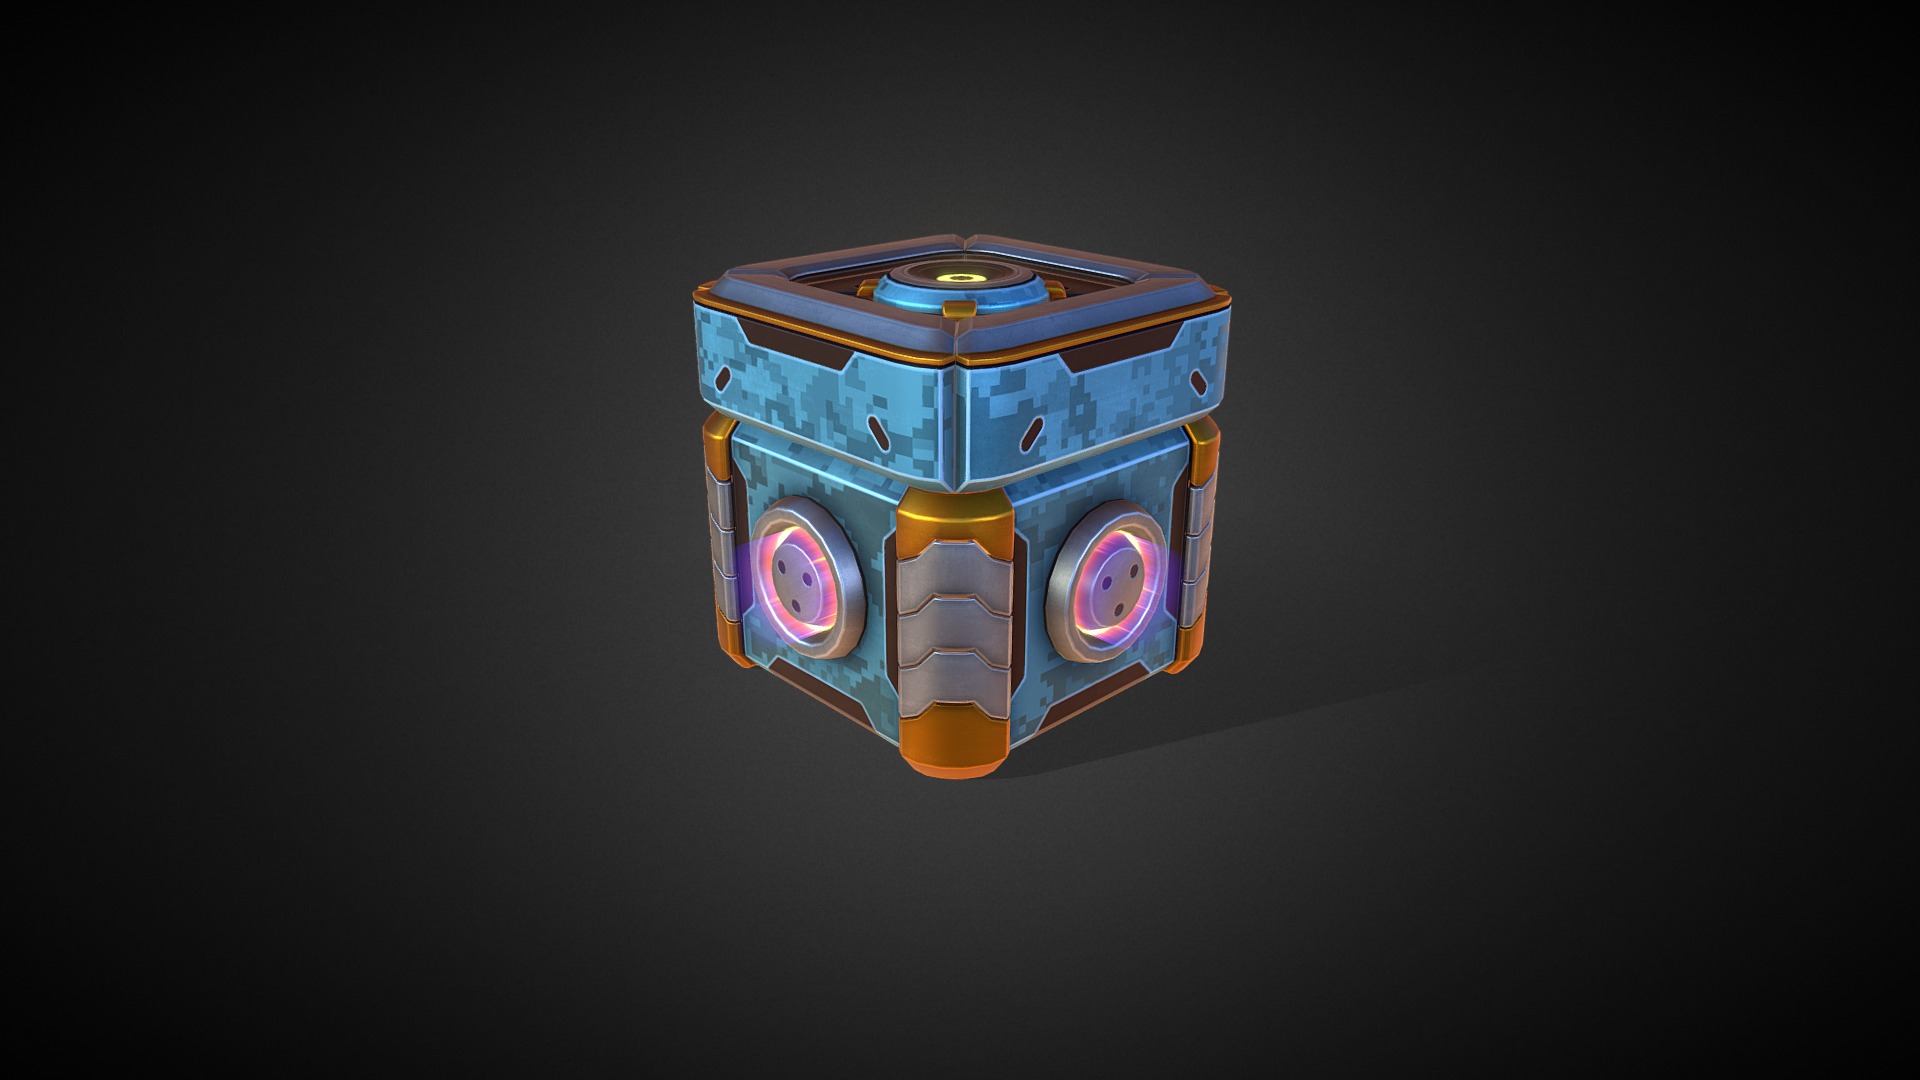 3D model Loot Box animated – Military skin - This is a 3D model of the Loot Box animated - Military skin. The 3D model is about a toy car with a blue and yellow design.